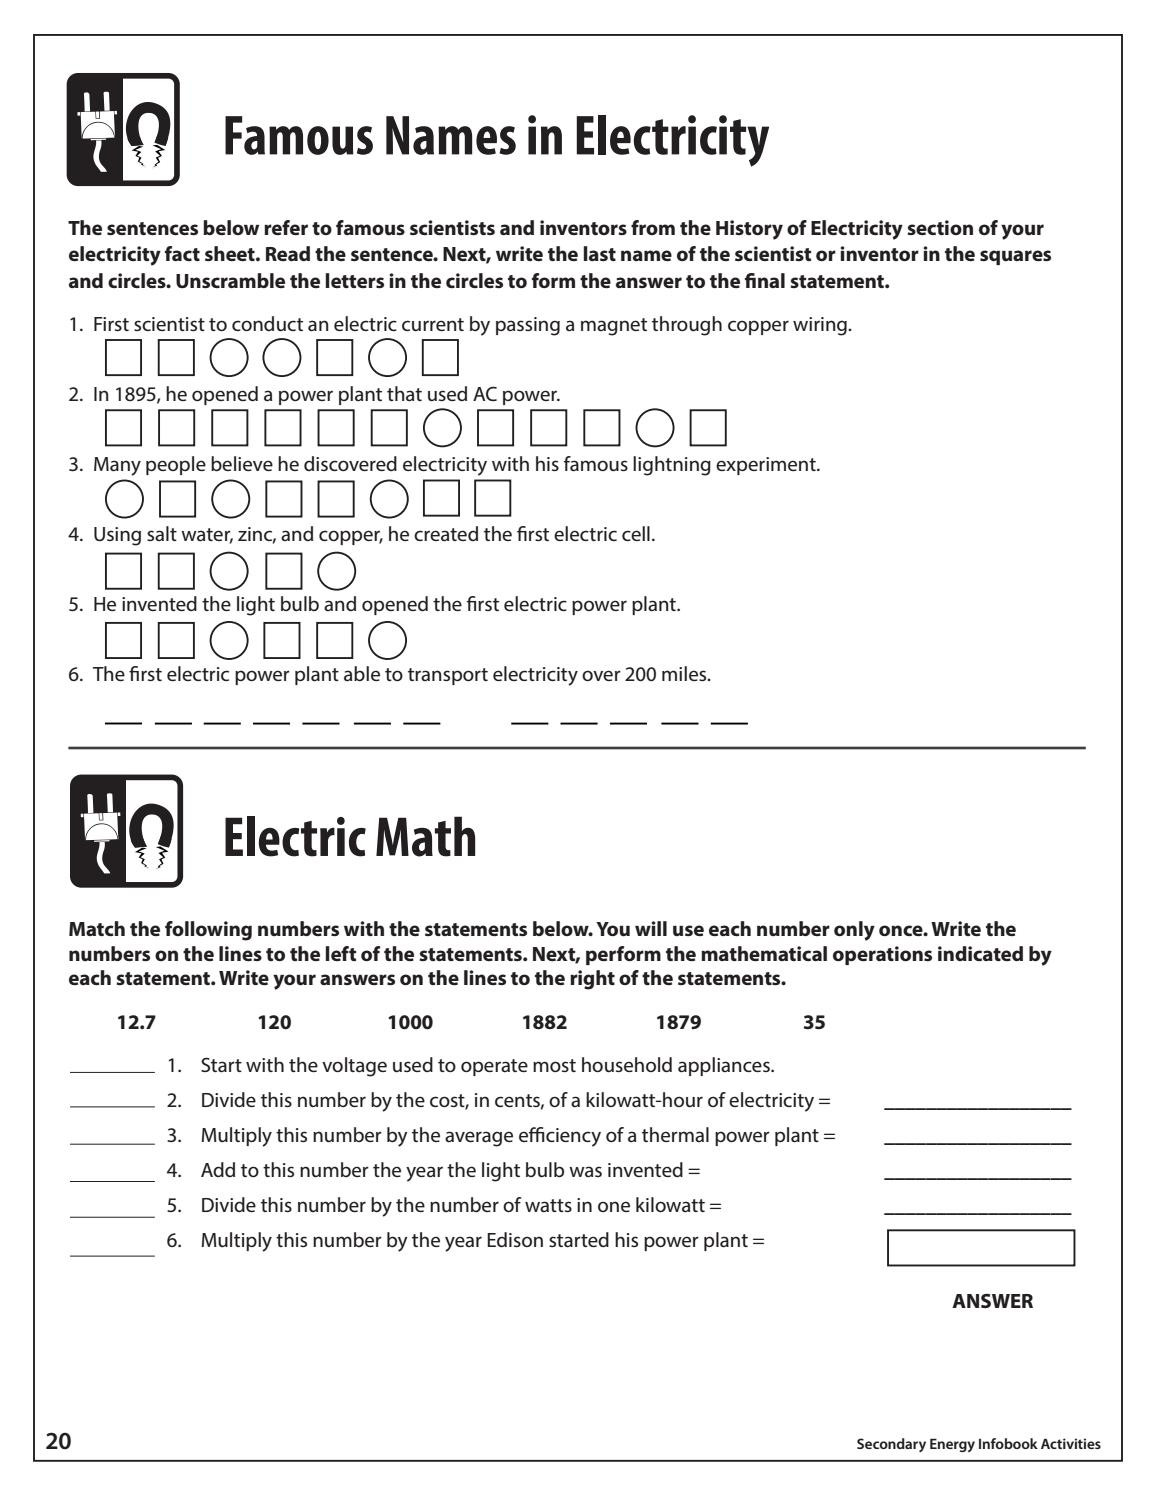 Electrical Power Worksheet Answers Secondary Energy Infobook Activities by Need Project issuu